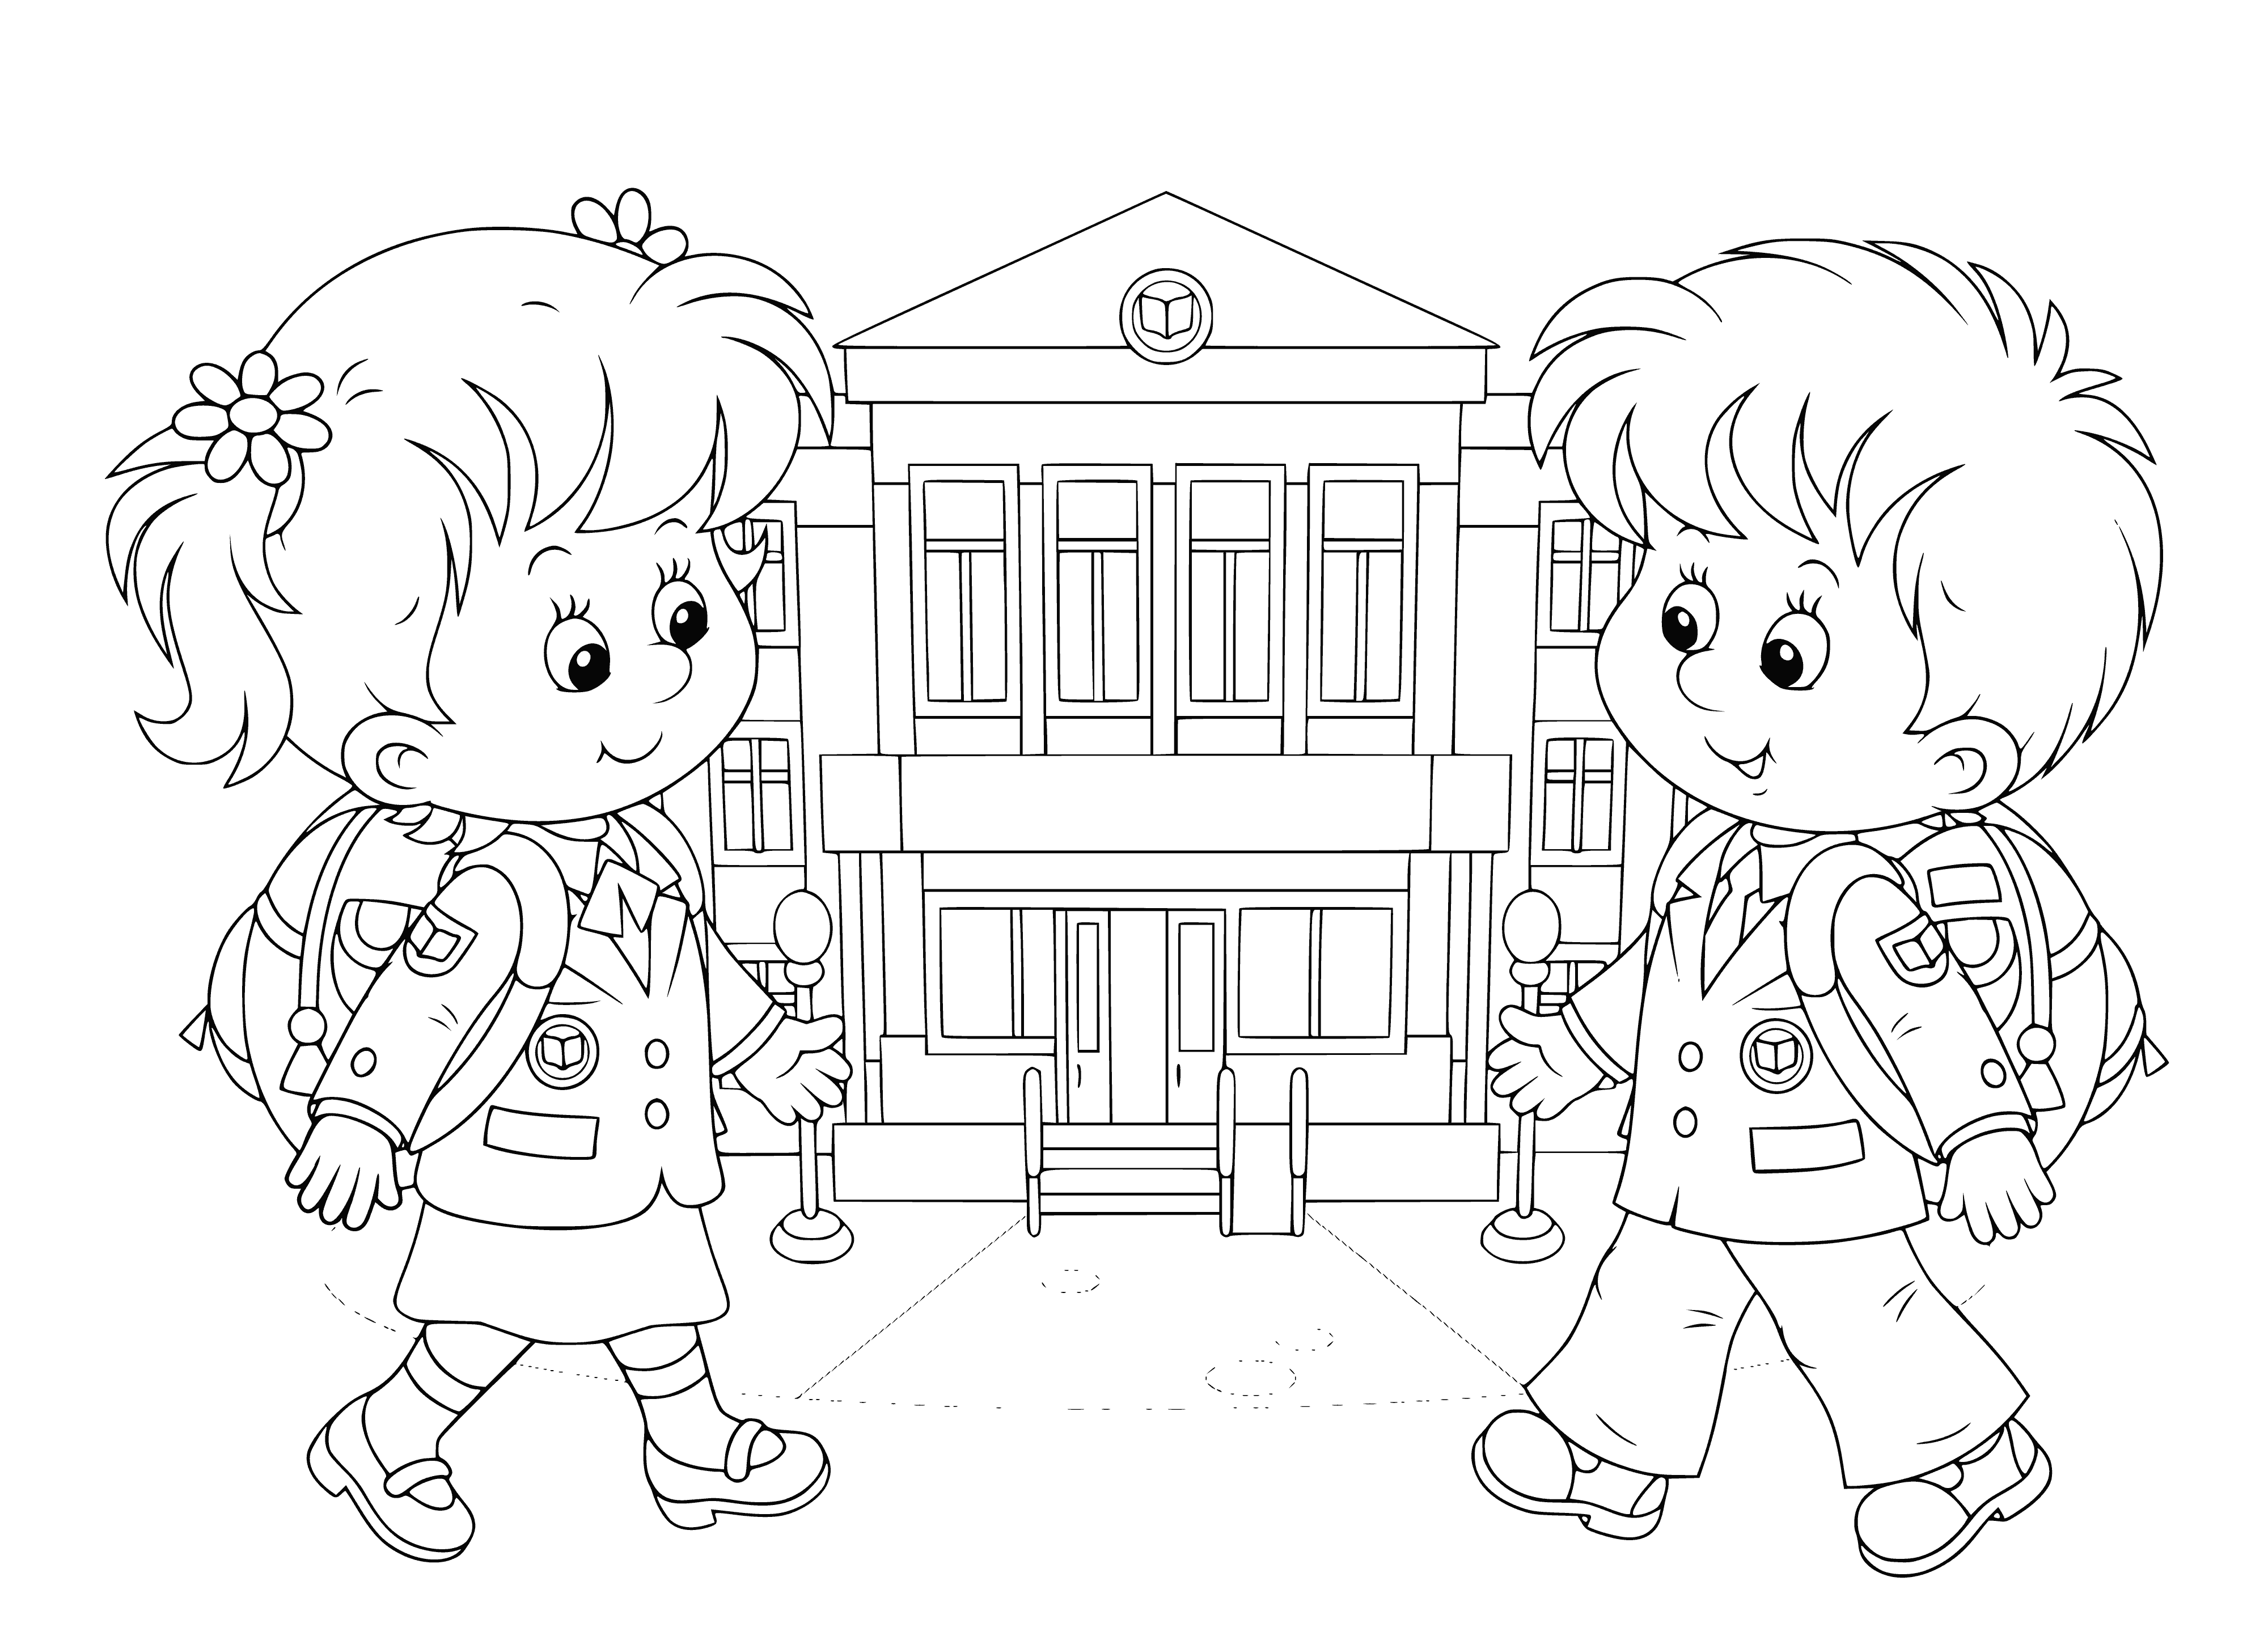 coloring page: Children excitedly enjoying a sunny morning as they start school. Wearing uniforms, backpacks in tow, they stand in front of their school building.